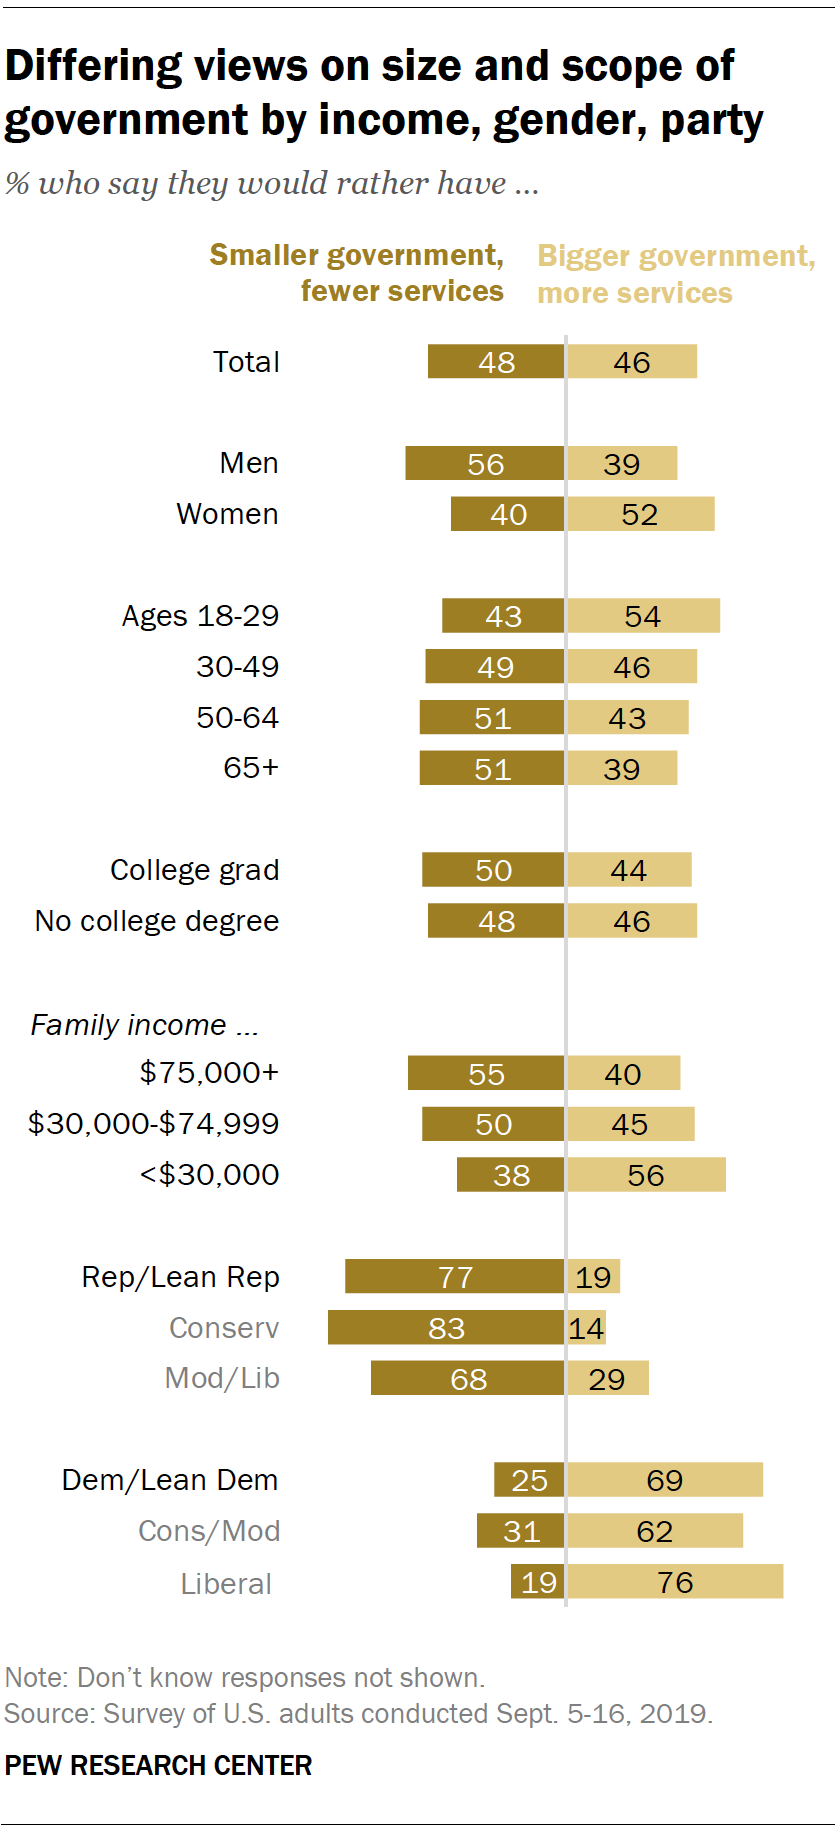 Differing views on size and scope of government by income, gender, party 